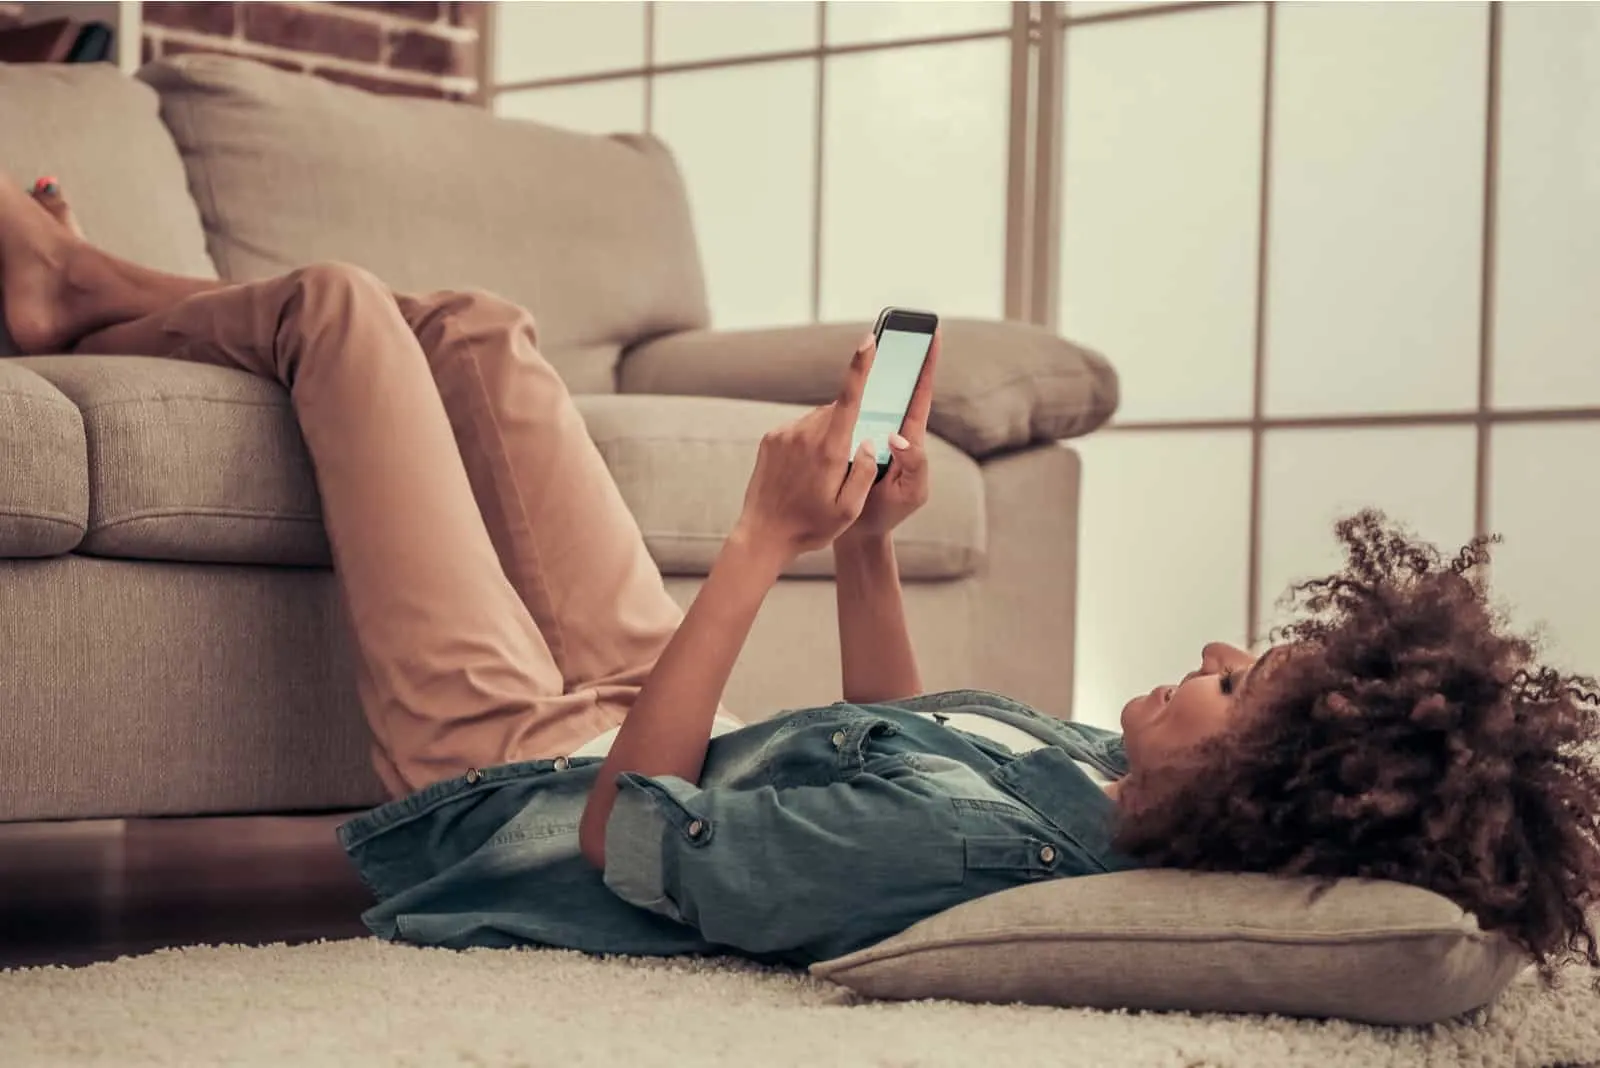 a smiling woman lies on the floor and a button on the phone